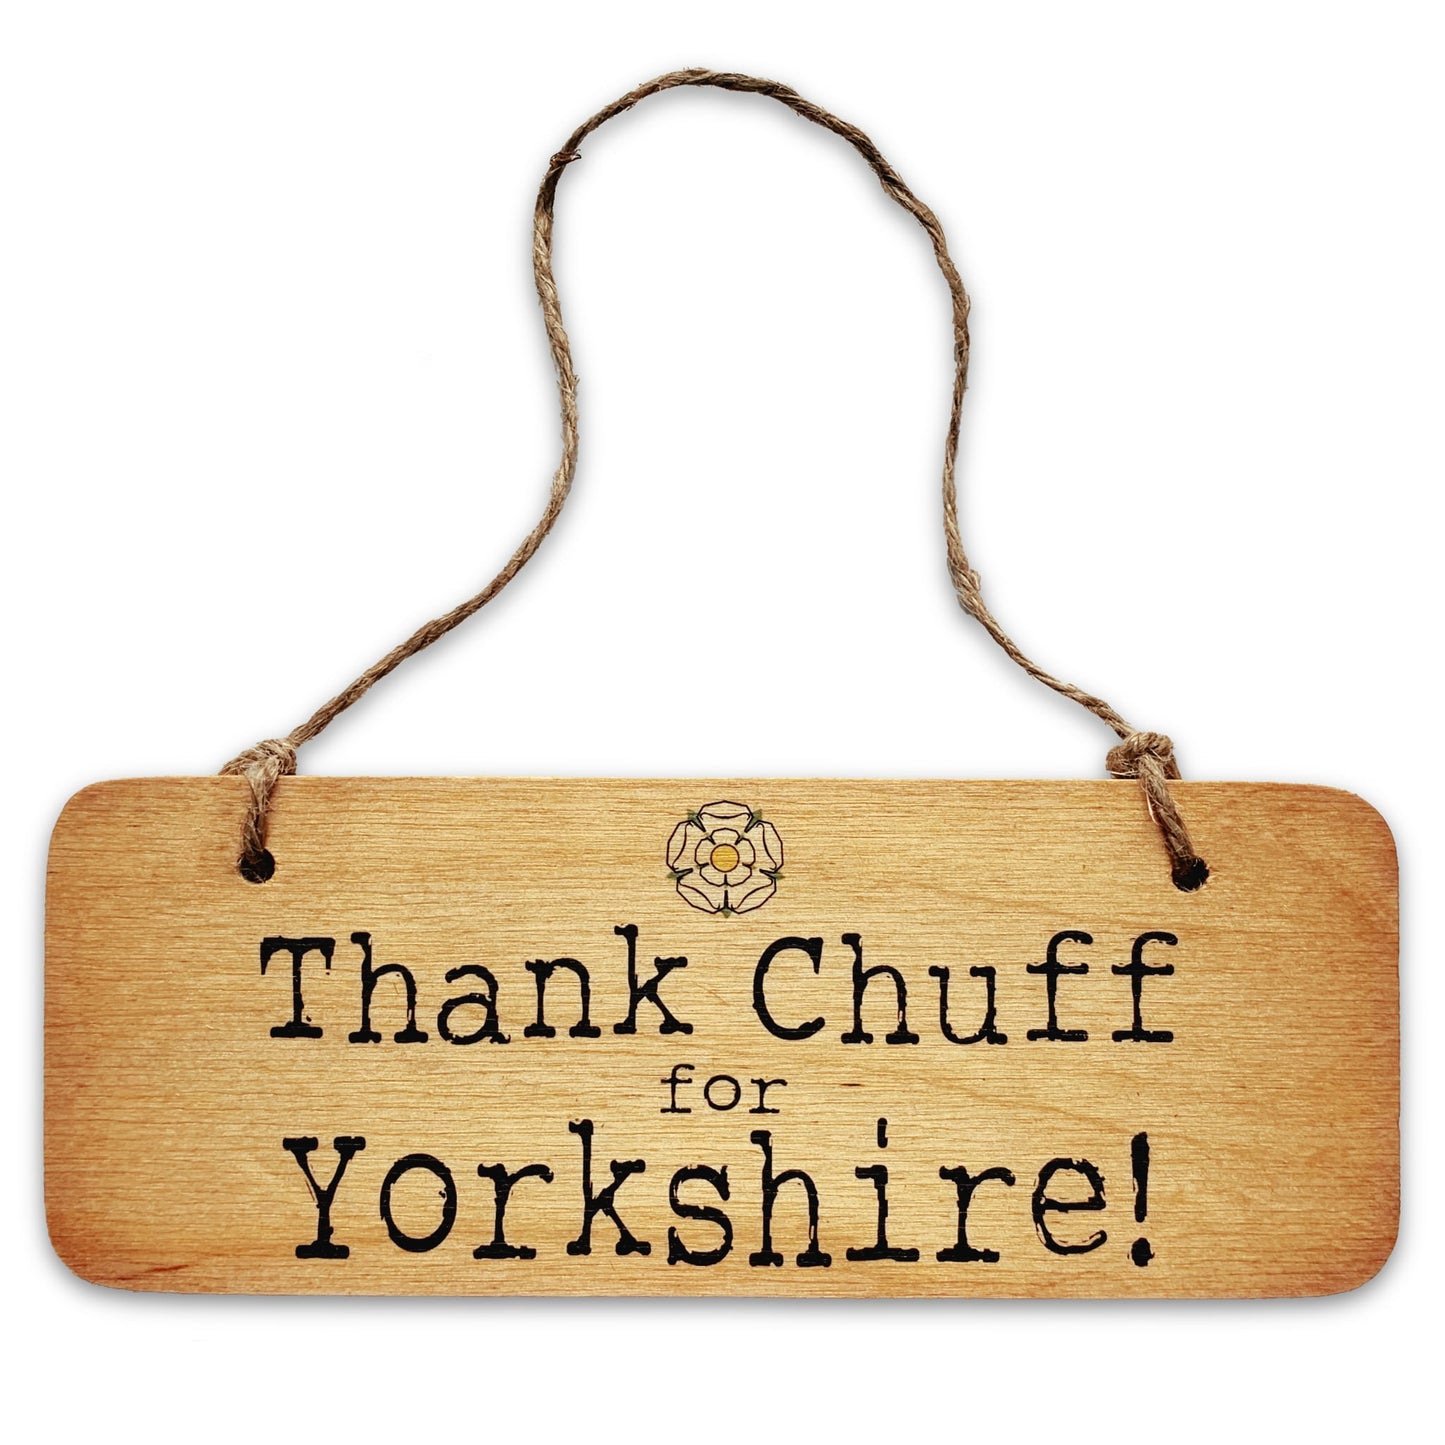 Load image into Gallery viewer, Thank Chuff for Yorkshire Rustic Wooden Sign - The Great Yorkshire Shop
